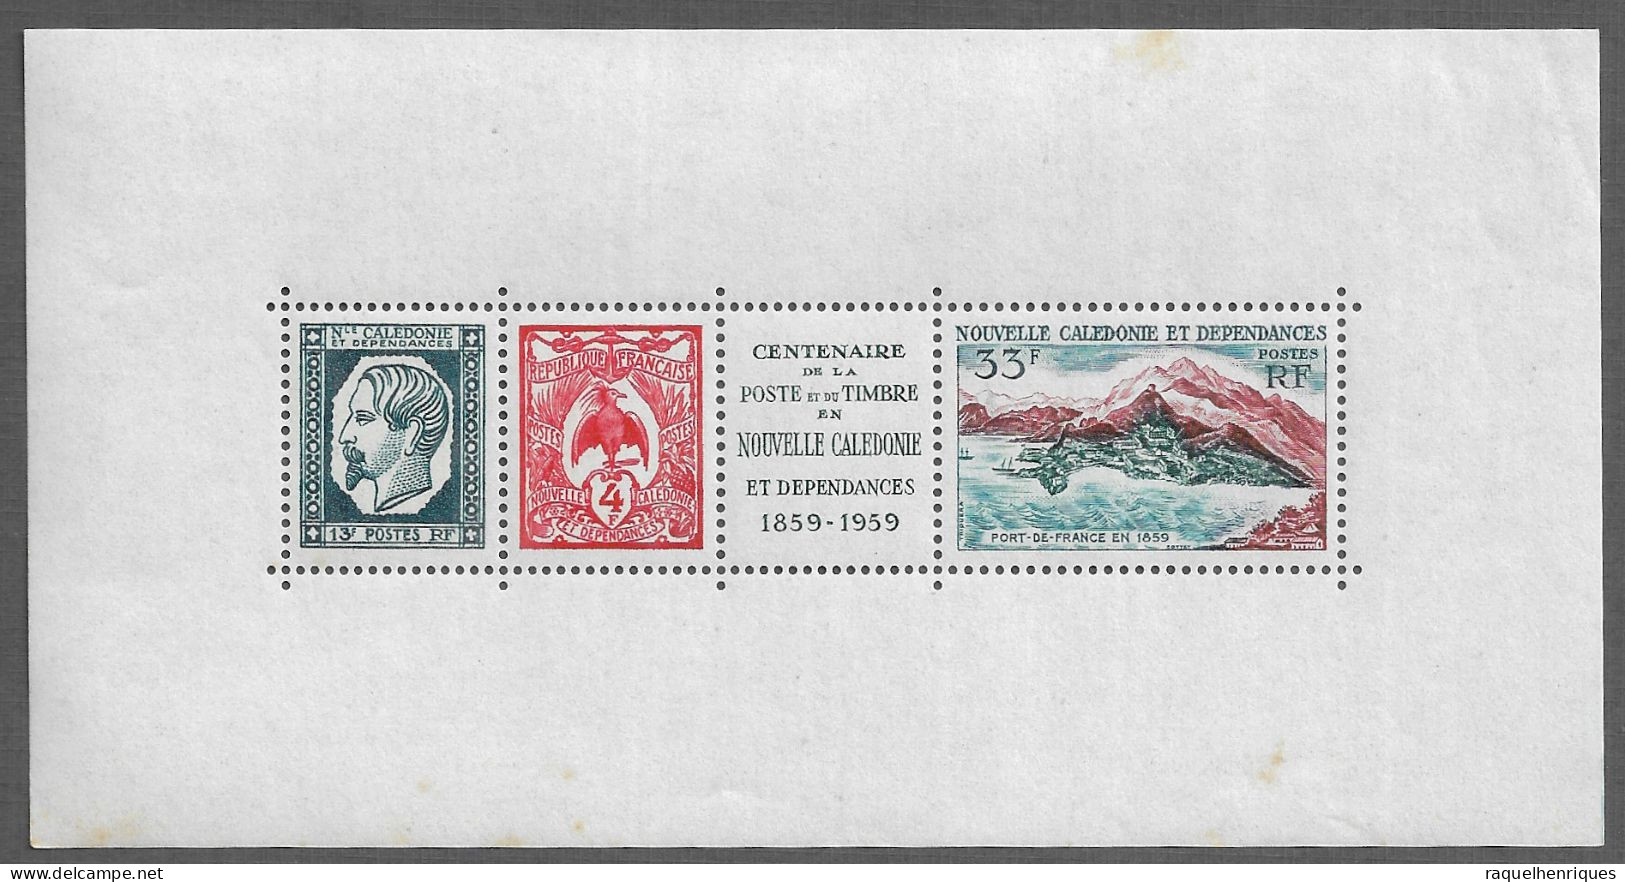 NEW CALEDONIA STAMP - 1960 The 100th Anniversary Of Postal Service In New Caledonia (NP#67-P39-L9) - Unused Stamps